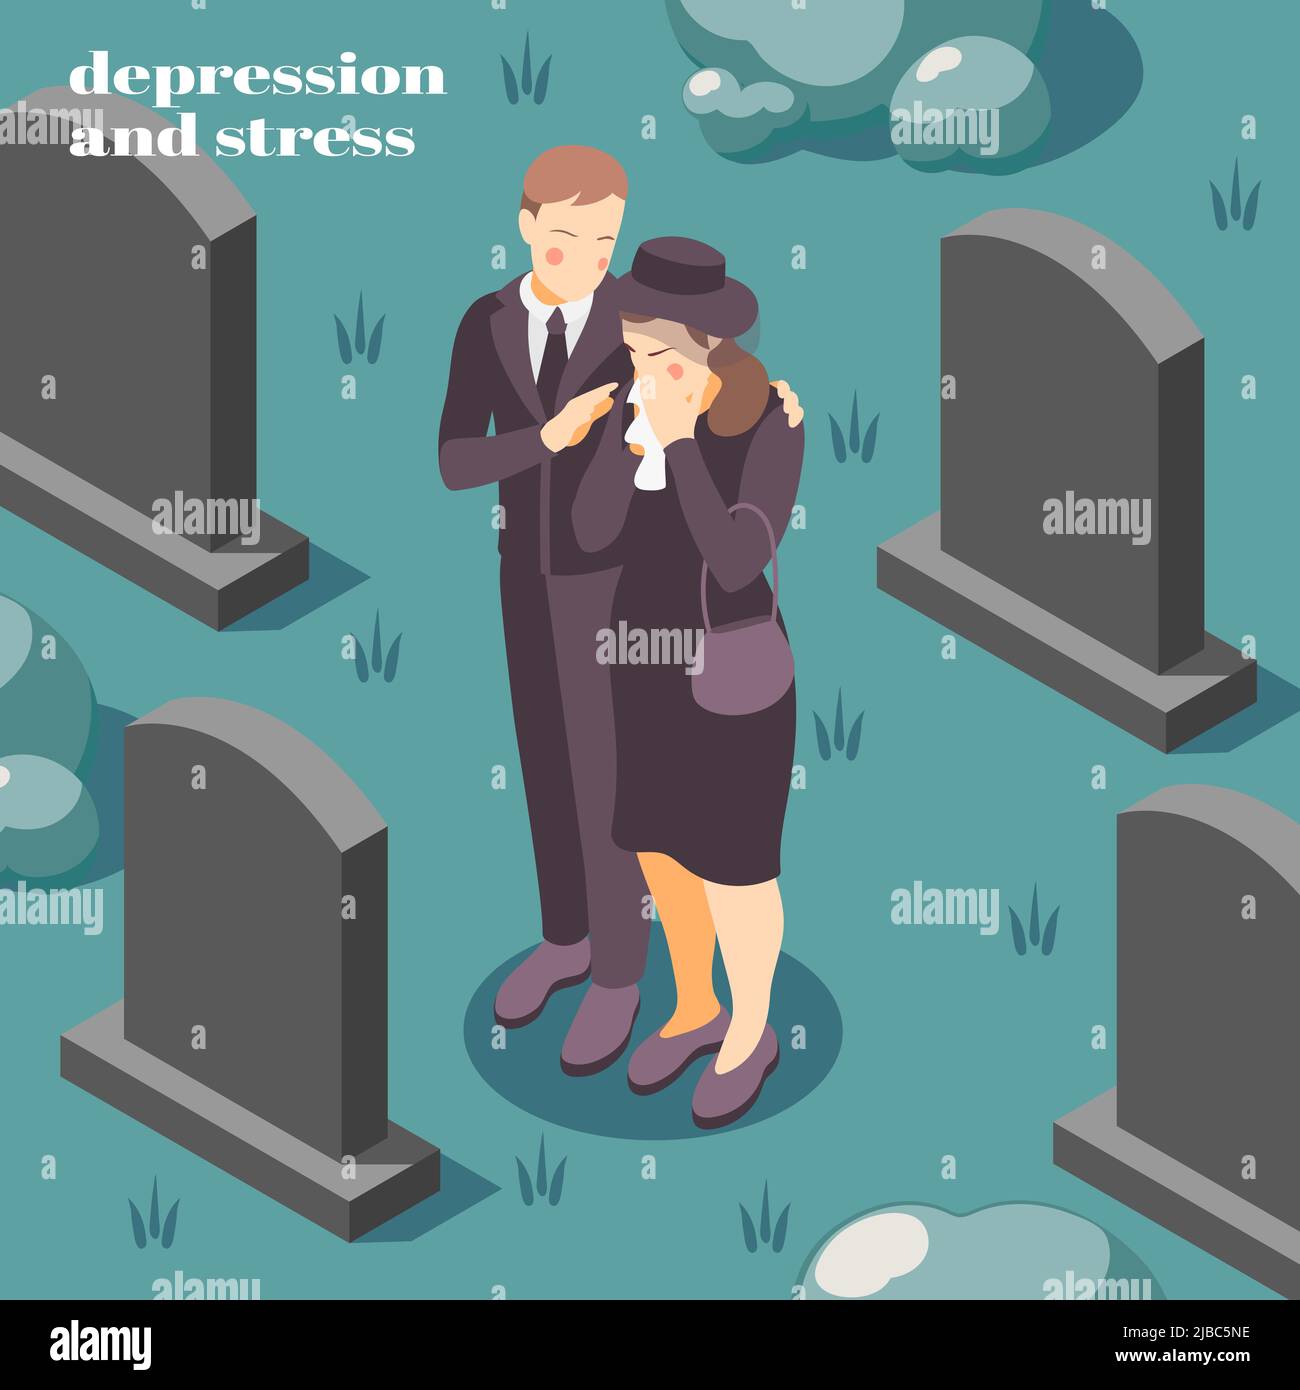 Mental health depression stress isometric composition on coping with grief loss death of loved one vector illustration Stock Vector